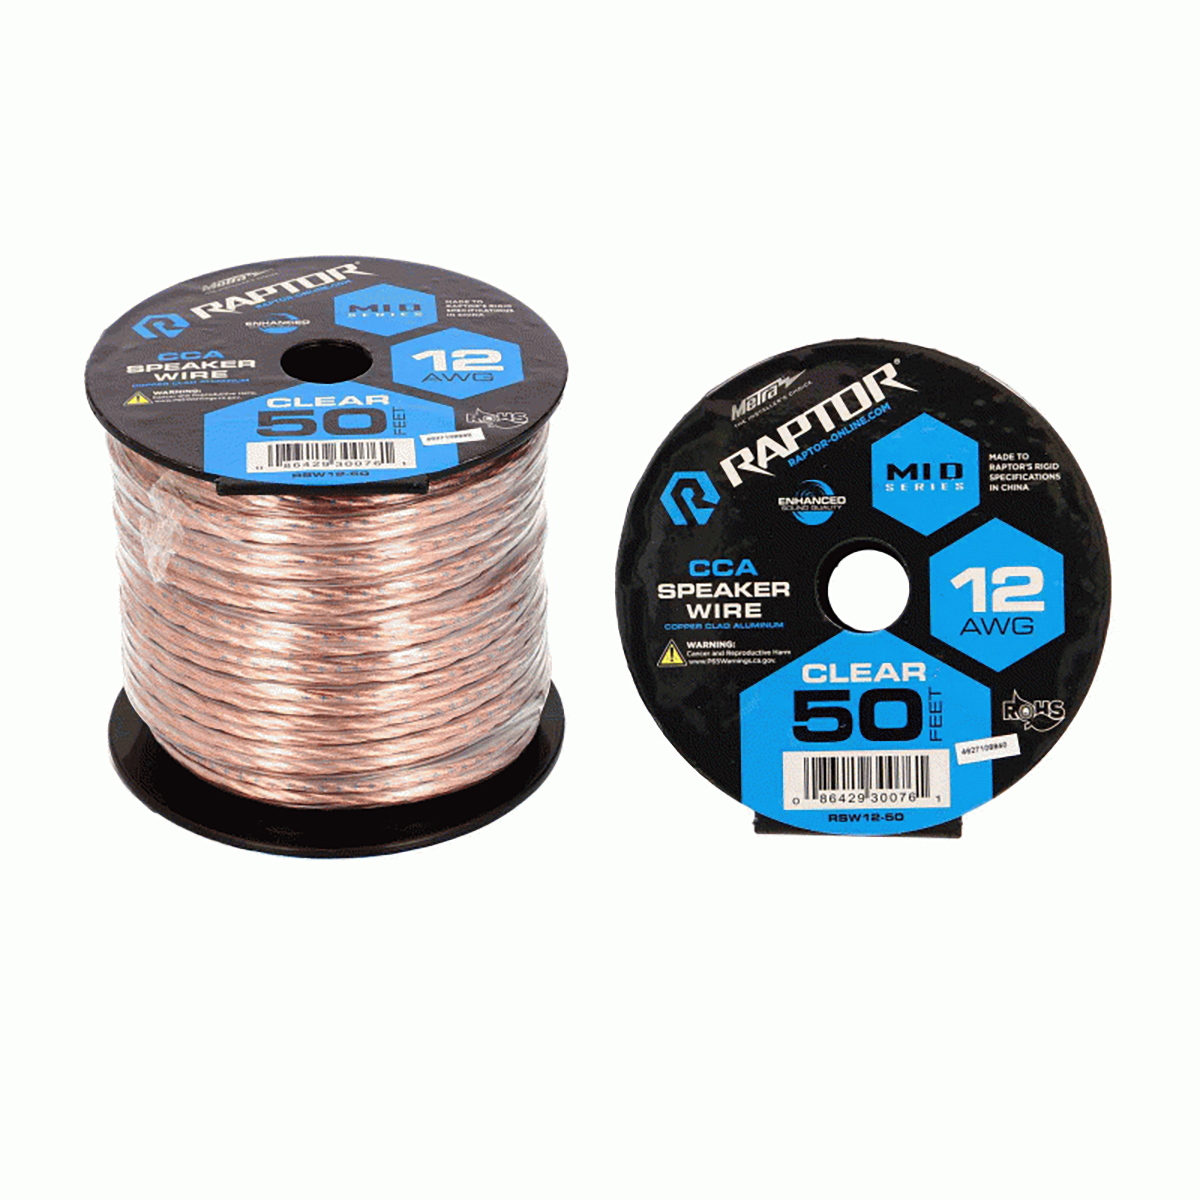 SPEAKER WIRE 12GA CLEAR 50FT  VICE SERIES